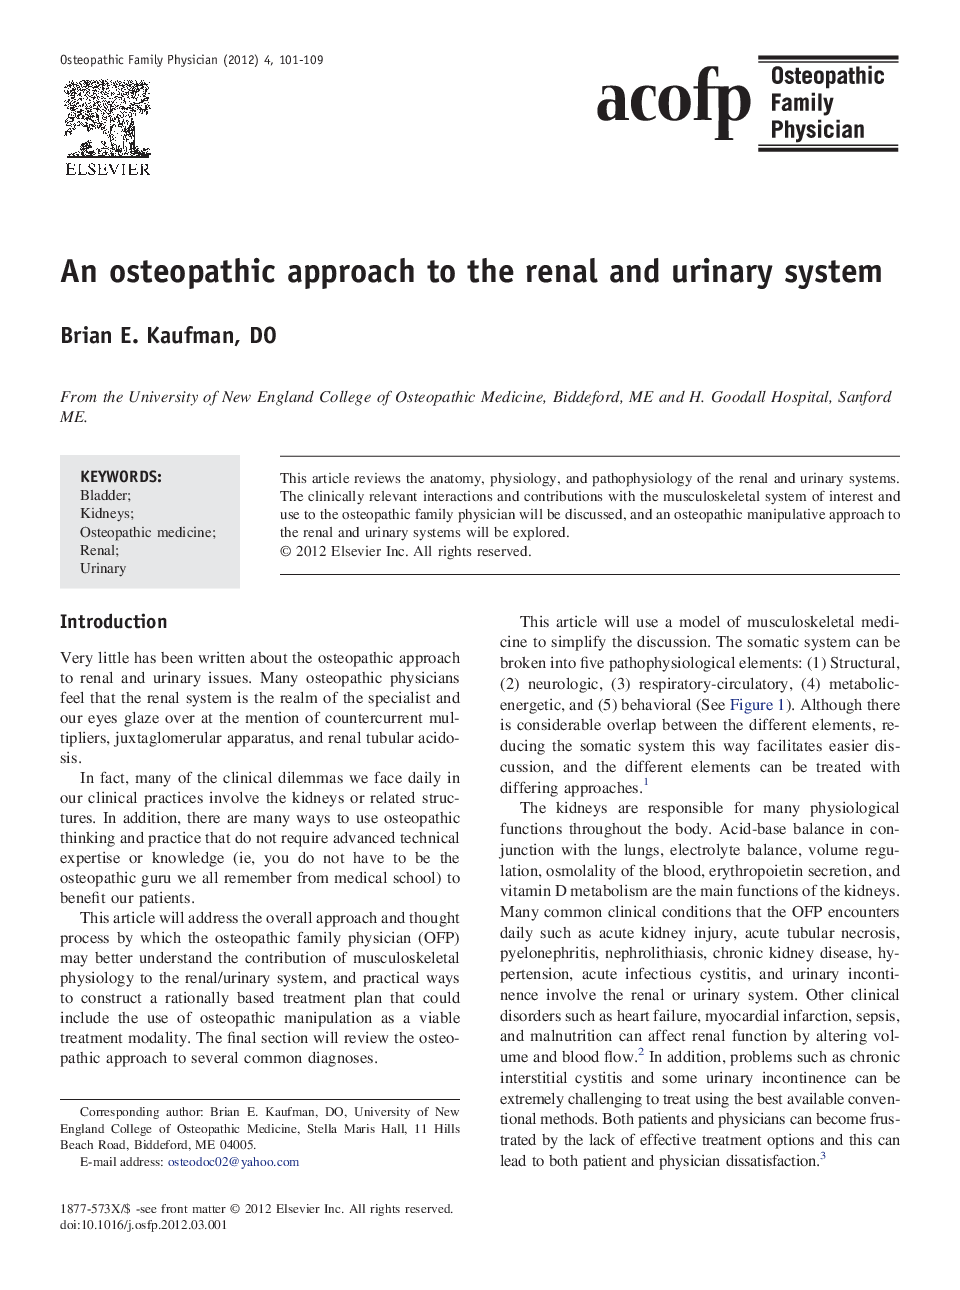 An osteopathic approach to the renal and urinary system